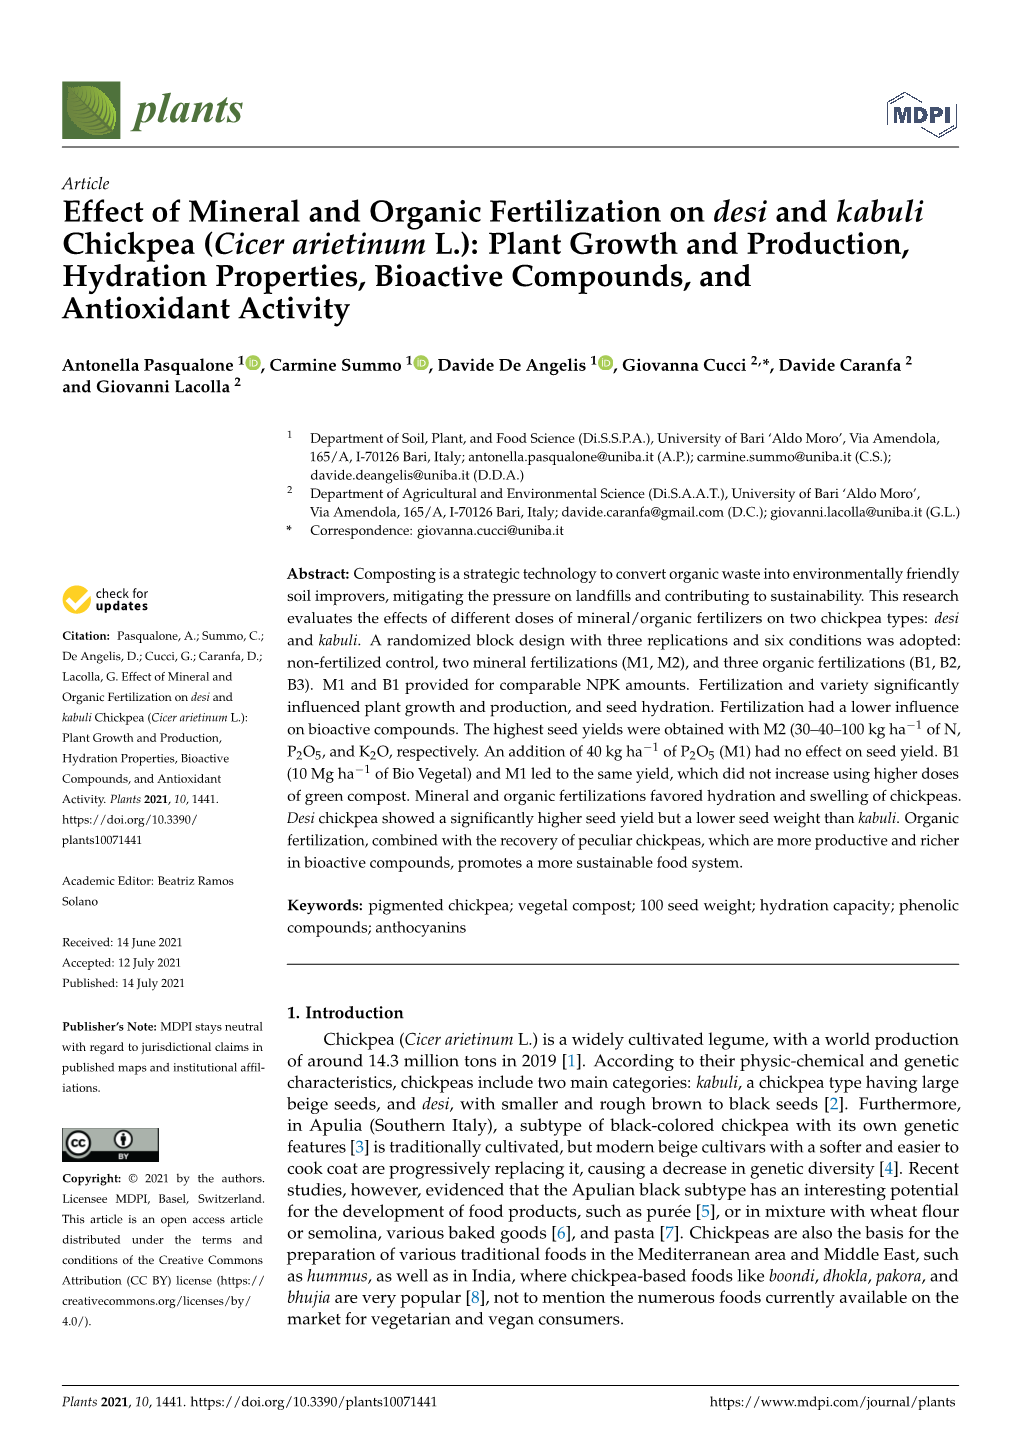 (Cicer Arietinum L.): Plant Growth and Production, Hydration Properties, Bioactive Compounds, and Antioxidant Activity